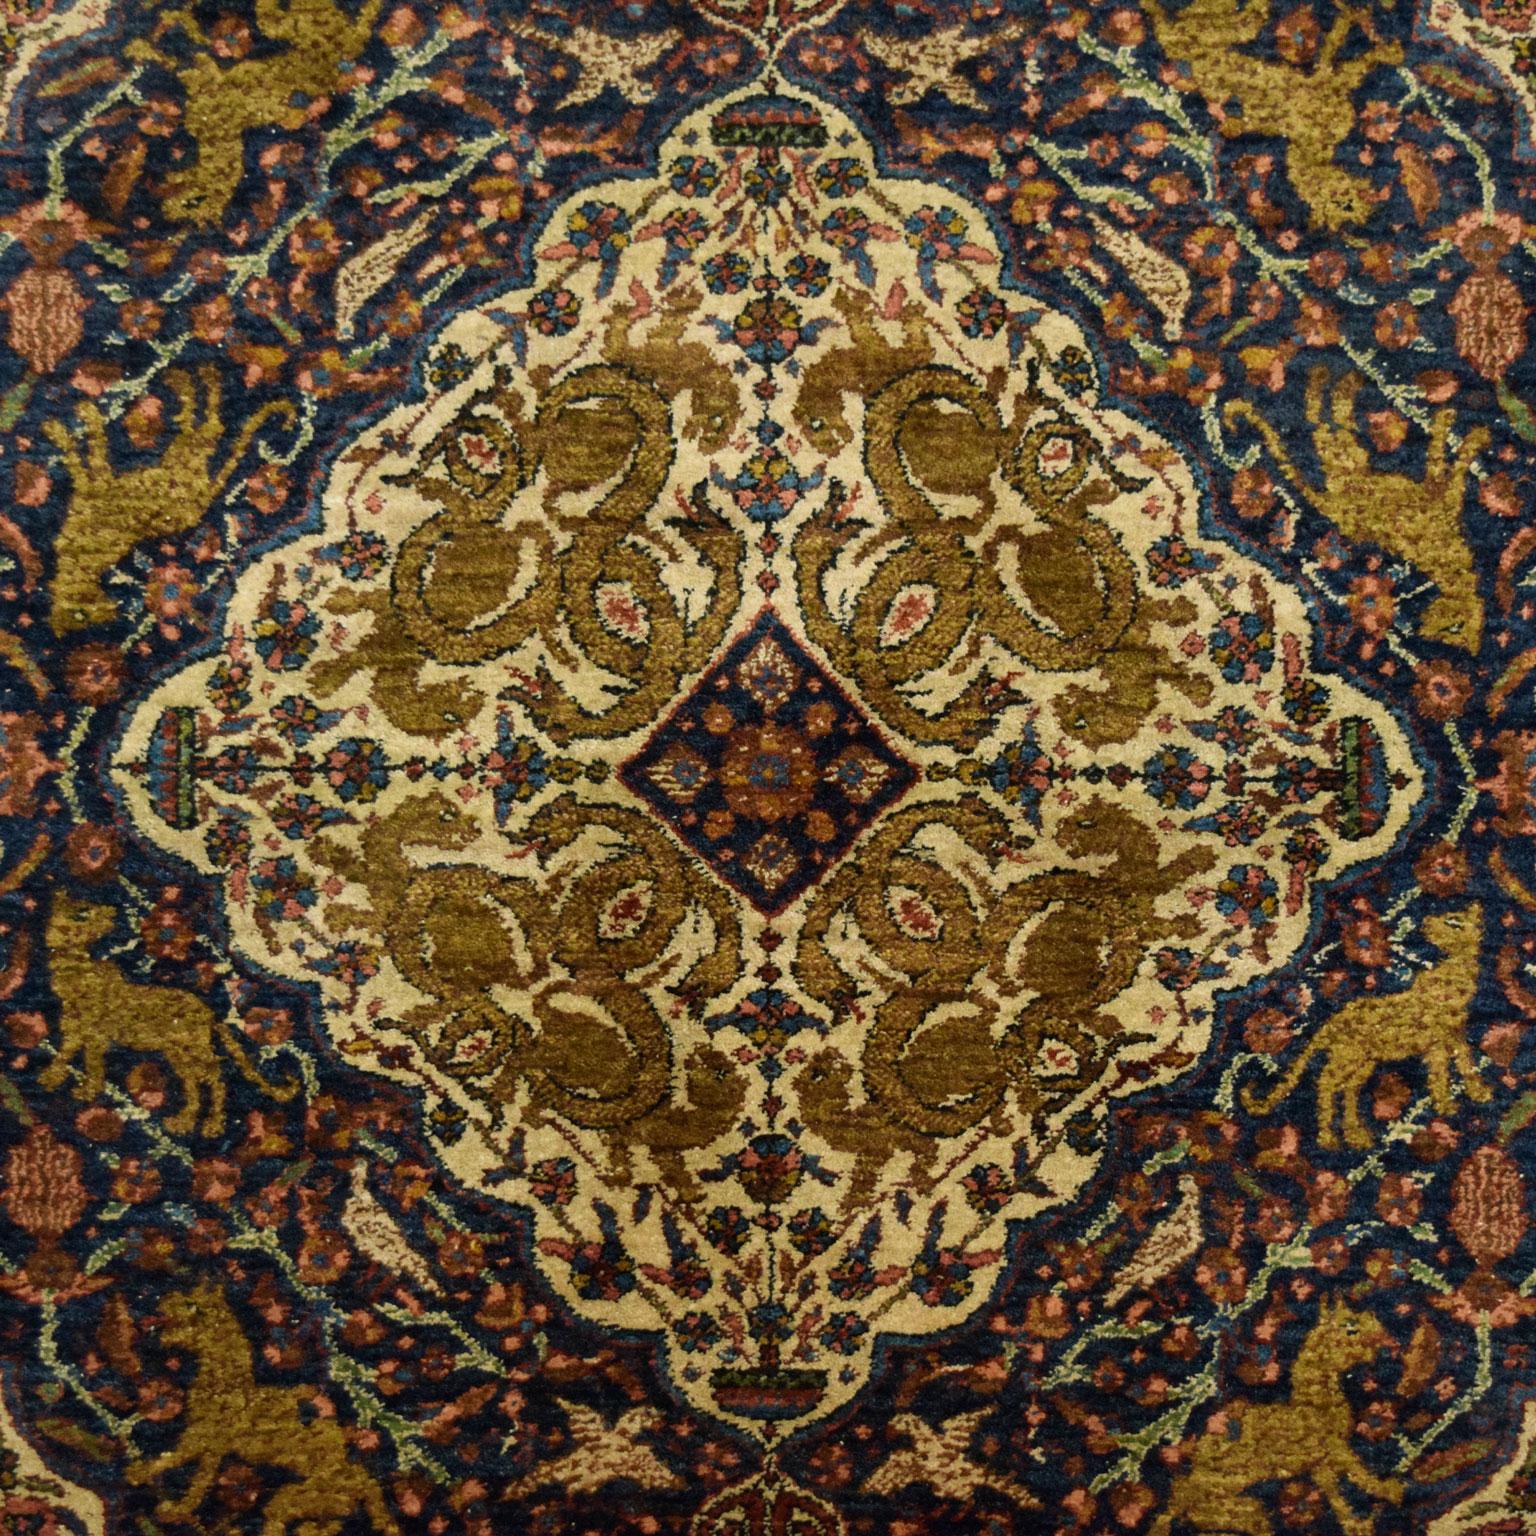 This antique Persian Khoy carpet, circa 1900, in cream, green, and indigo measures 4’9” x 7’10”. Featuring a traditional Persian hand-knotted weave, this carpet exhibits a soft and plush pile and durable foundation. The pile consists of hand-spun